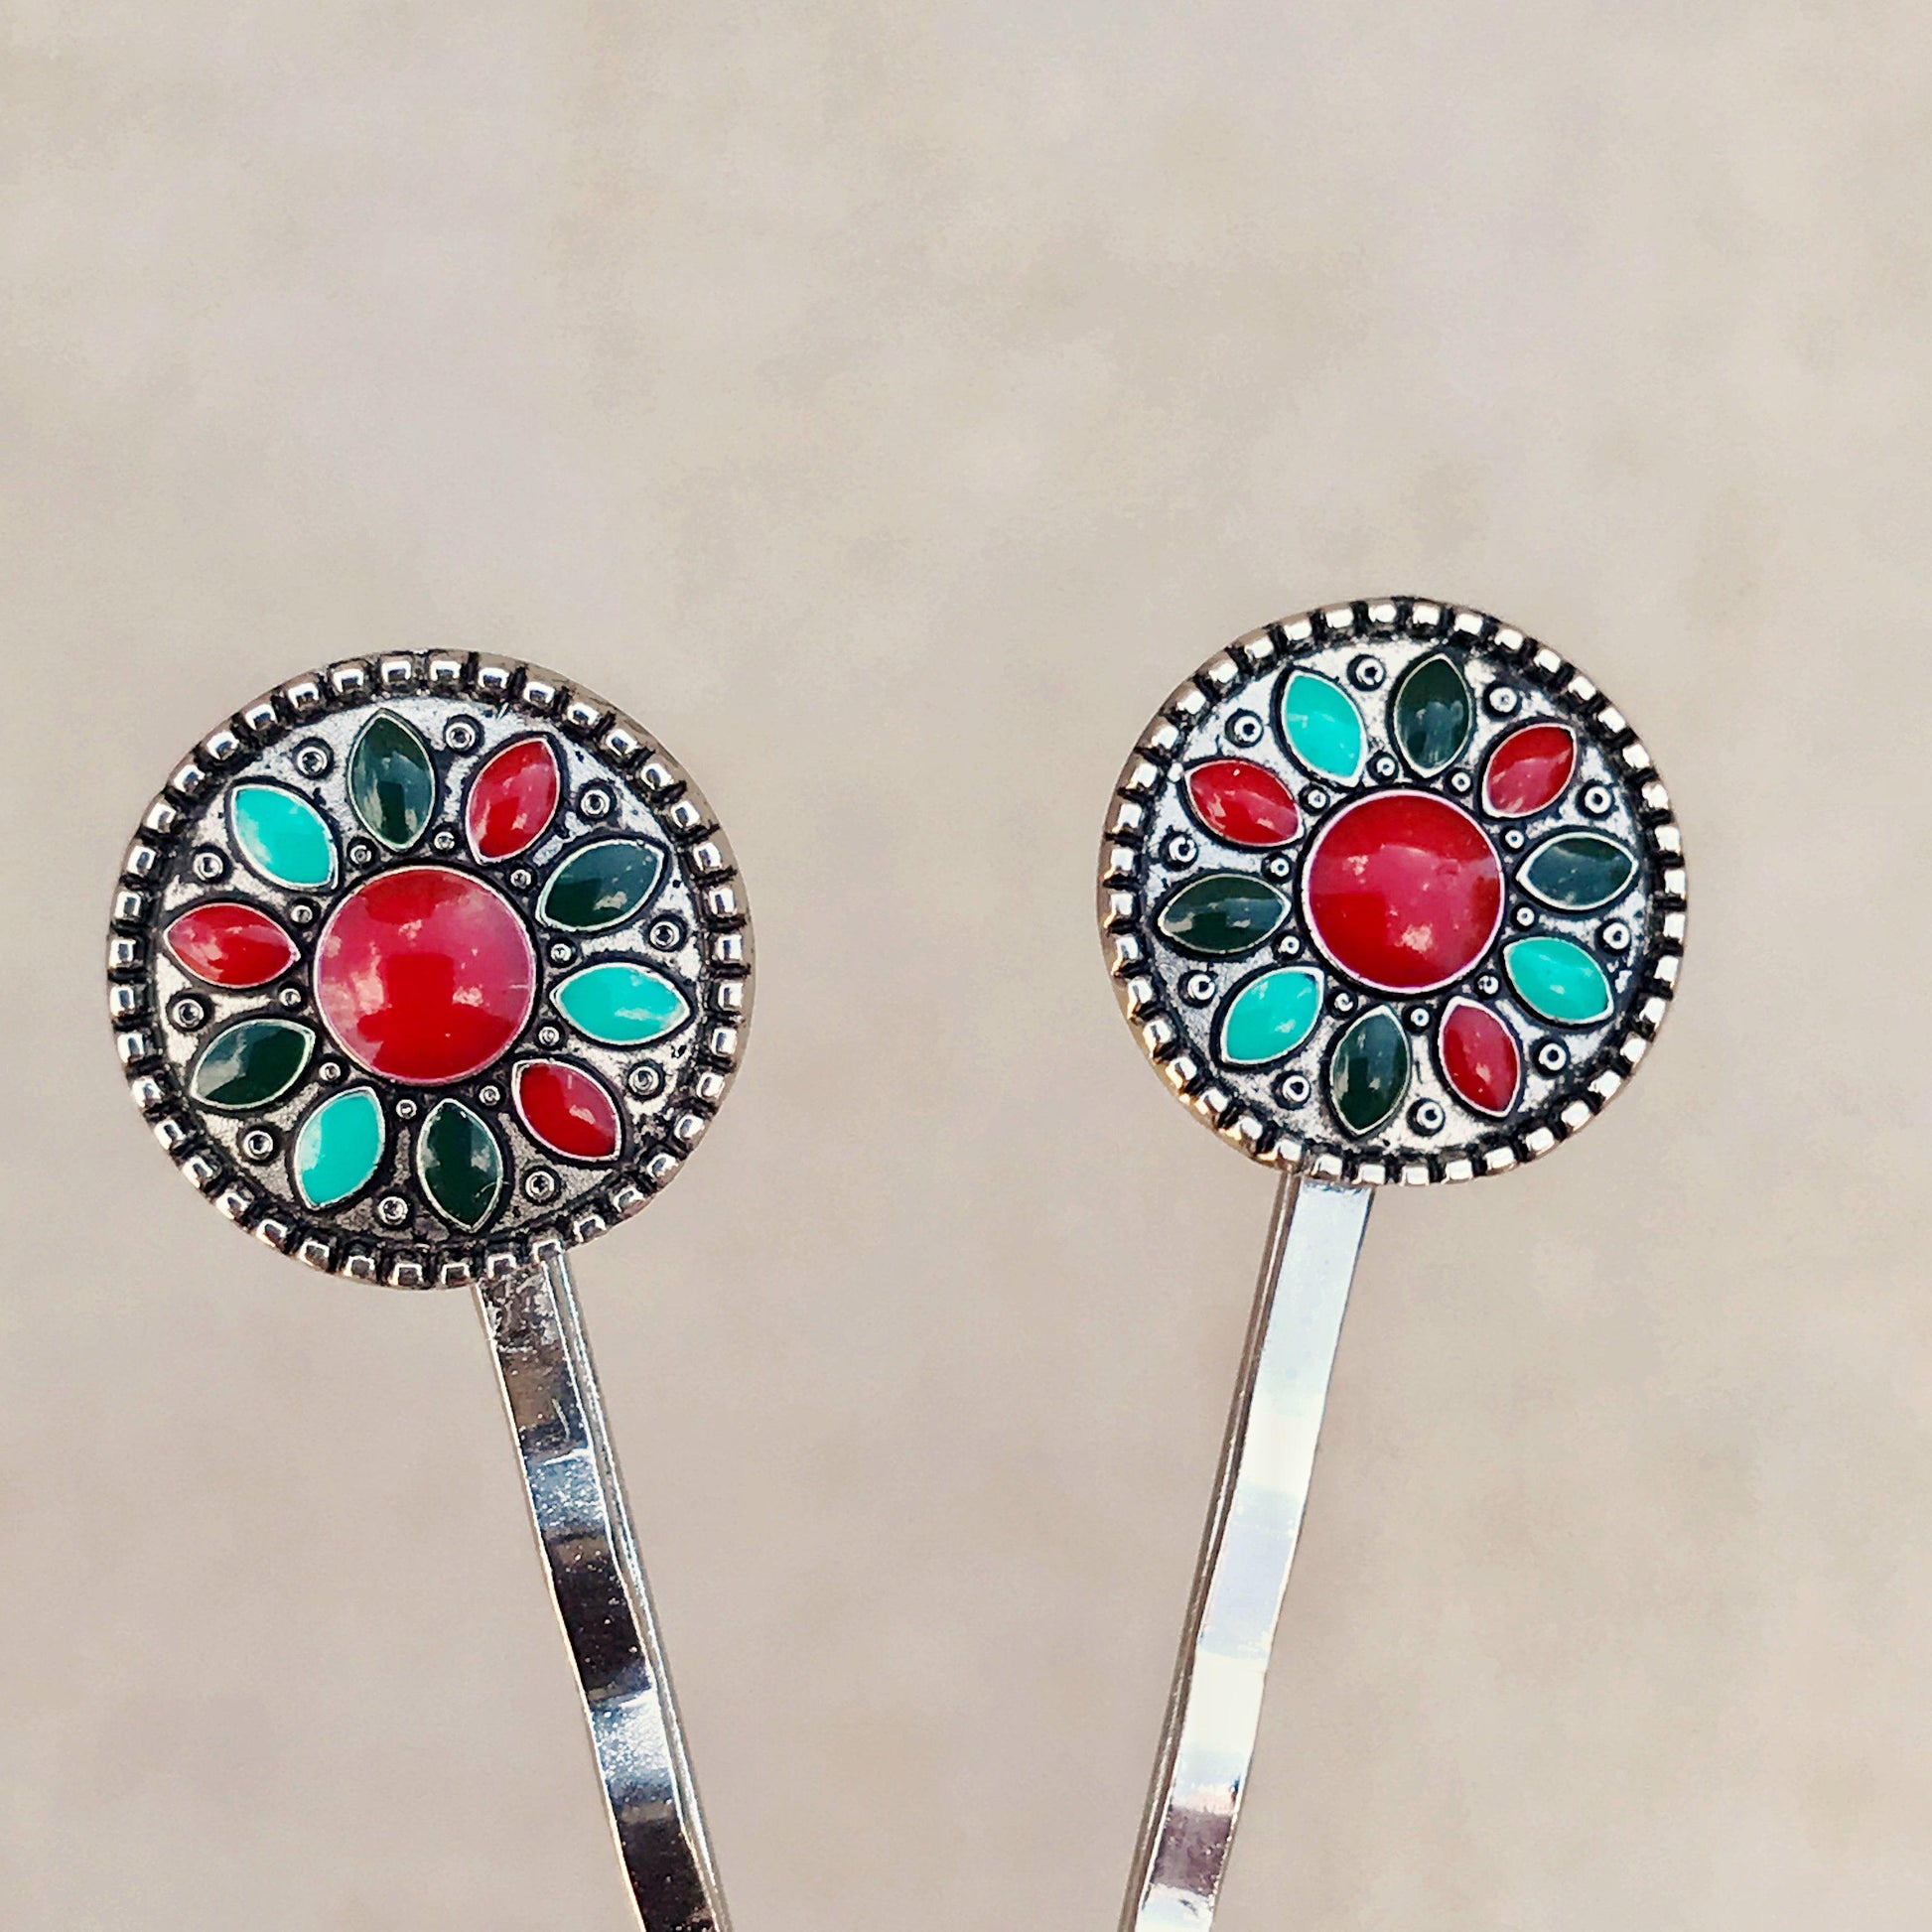 Boho Western Turquoise Medallion Hair Pins - Set of 2 Stylish Accessories